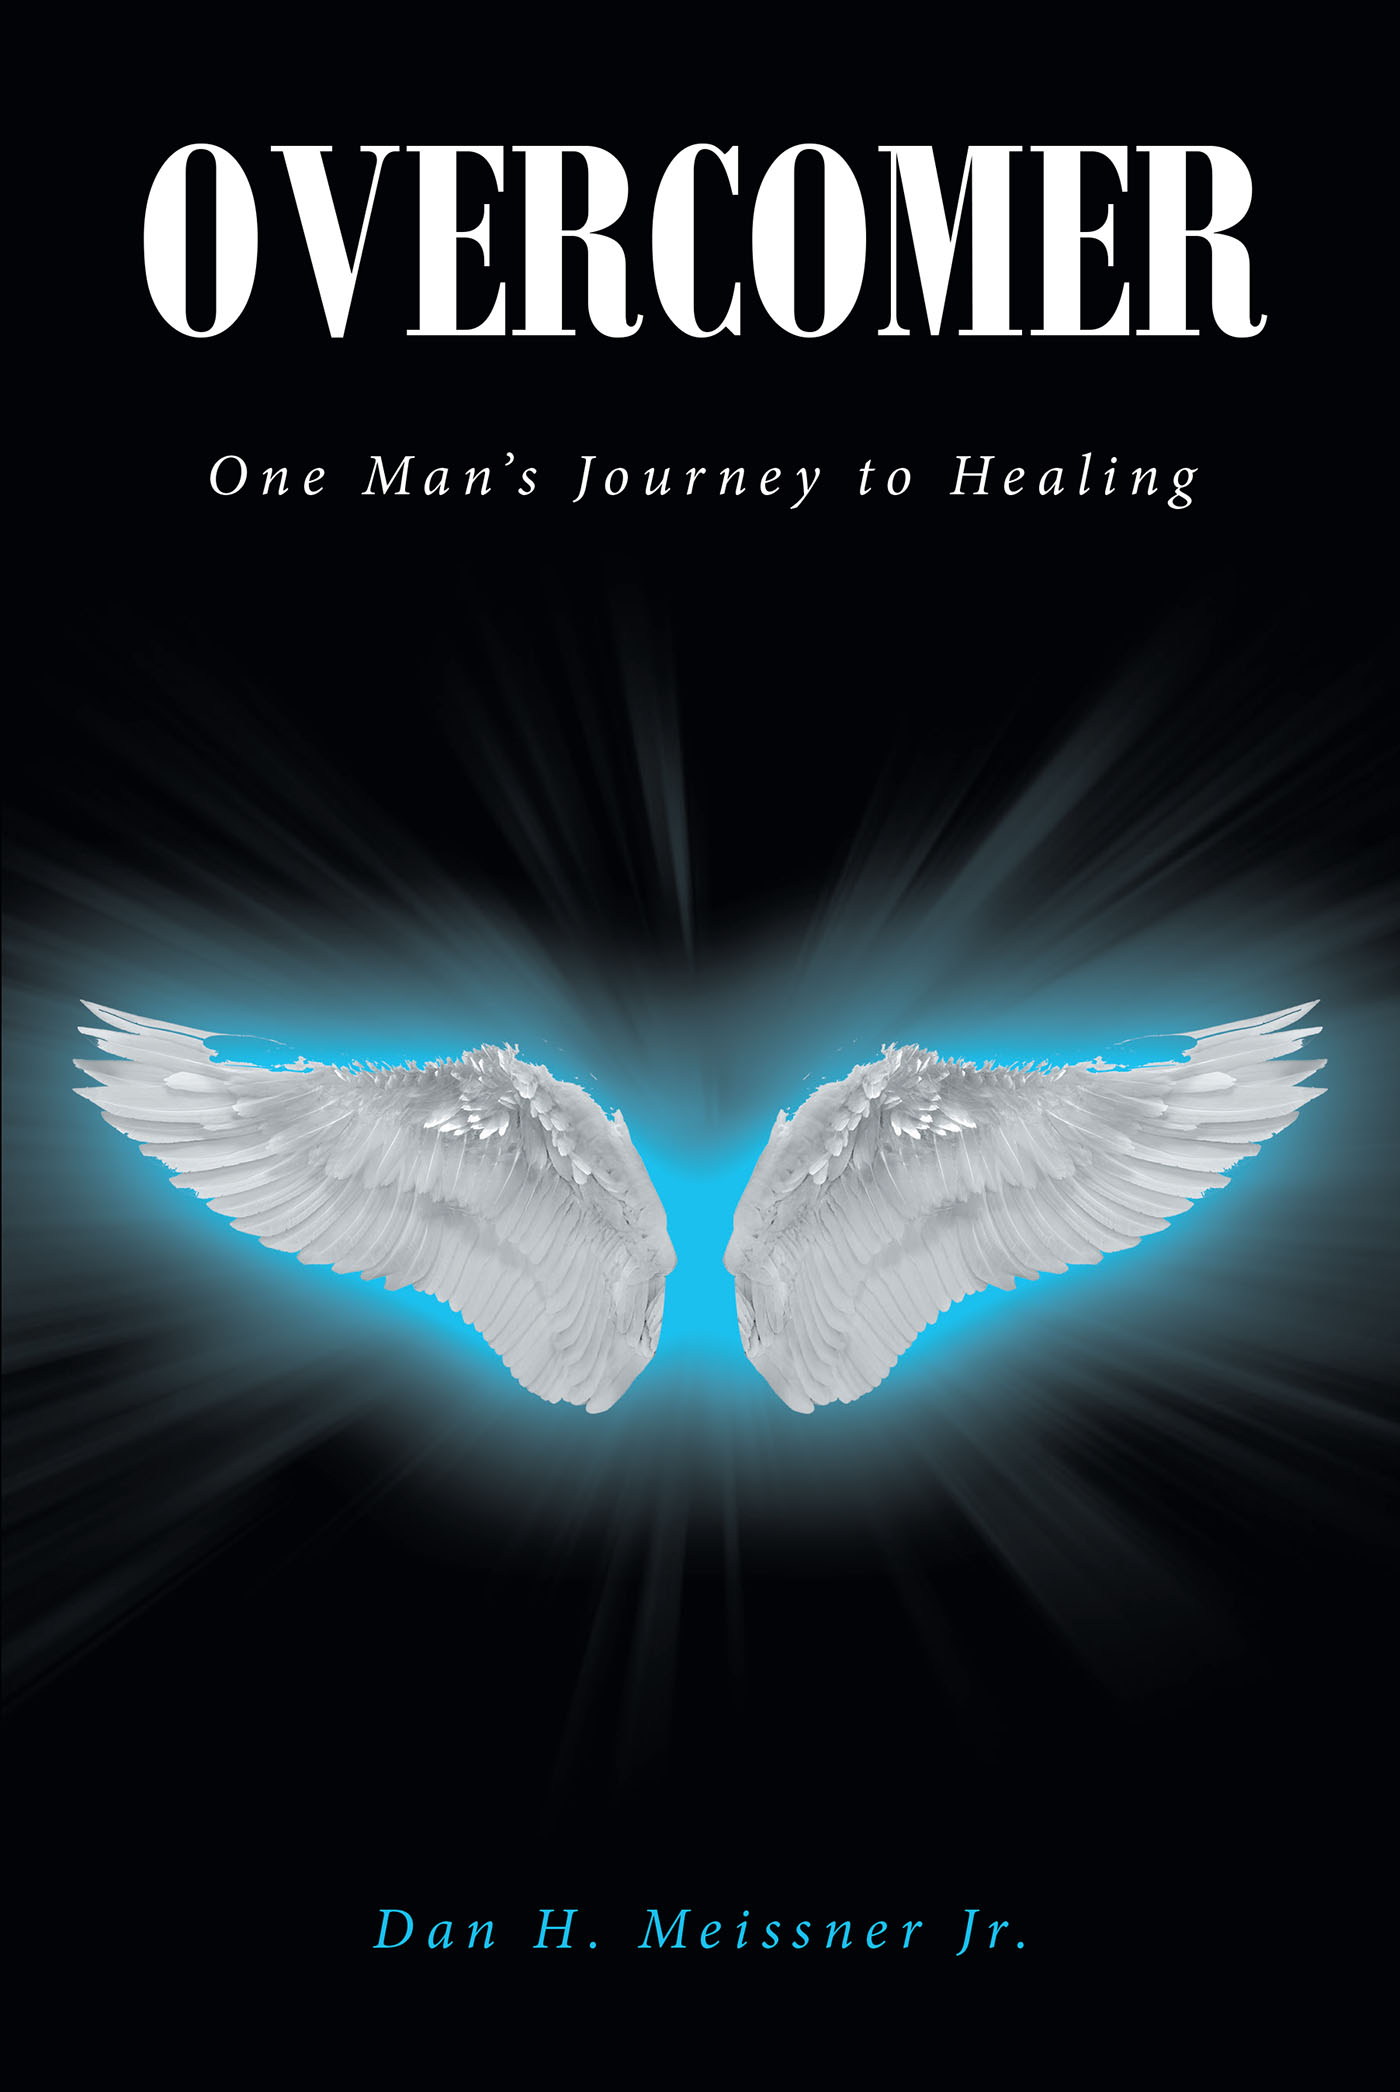 Dan H. Meissner Jr.’s Newly Released "Overcomer: One Man’s Journey to Healing" is a Powerful Personal Memoir That Offers a Message of Comfort